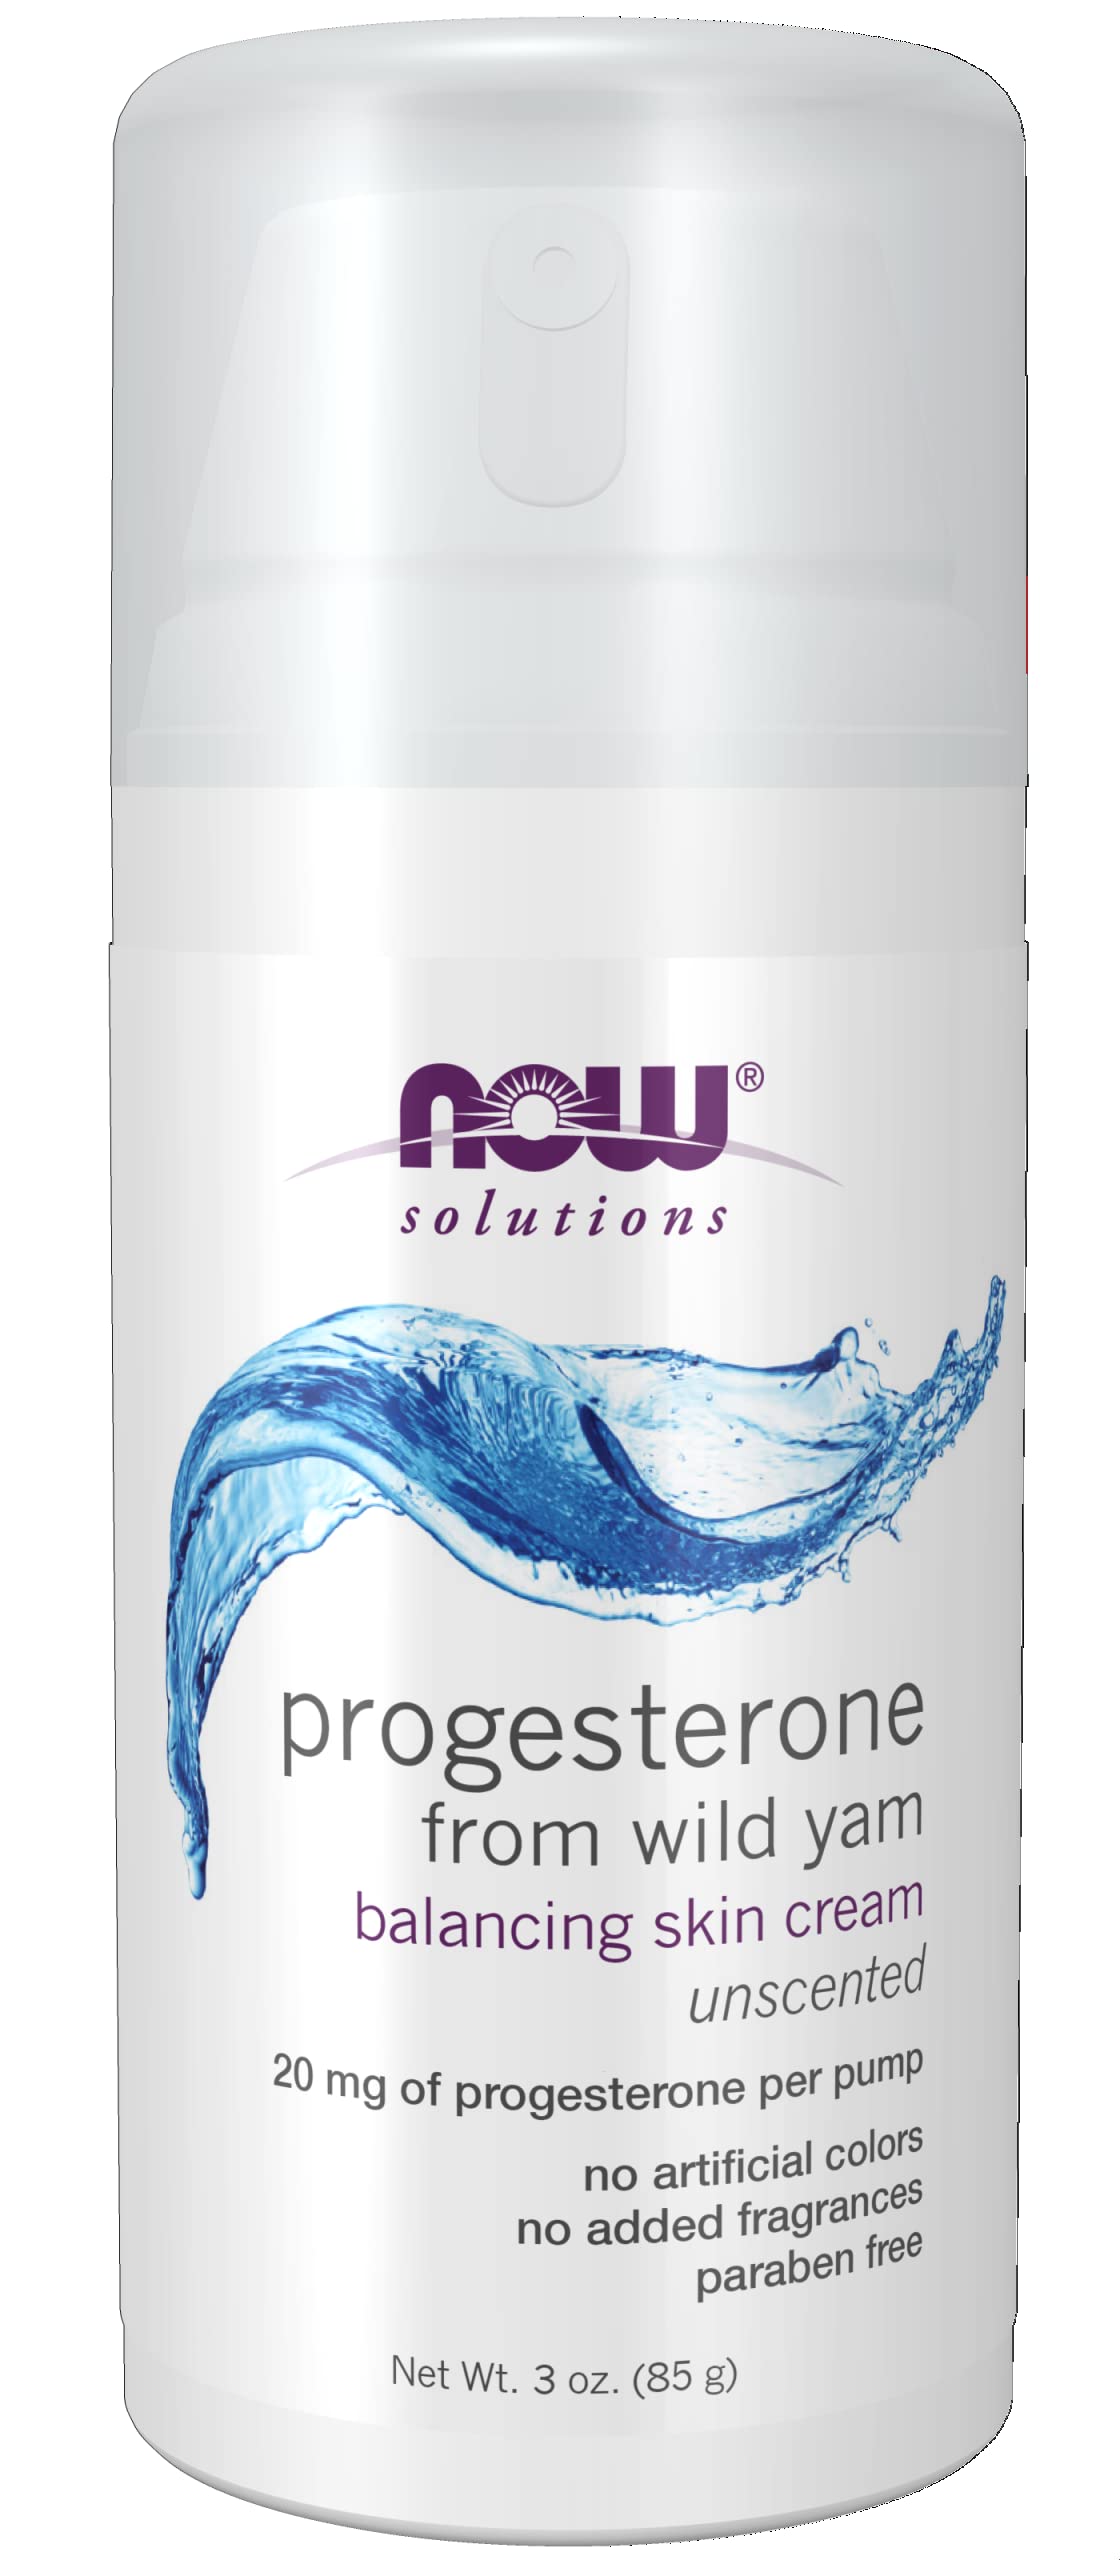 NOW Solutions, Natural Progesterone, Balancing Skin cream, 20 mg of Natural Progesterone Per Pump, Unscented, 3-Ounce